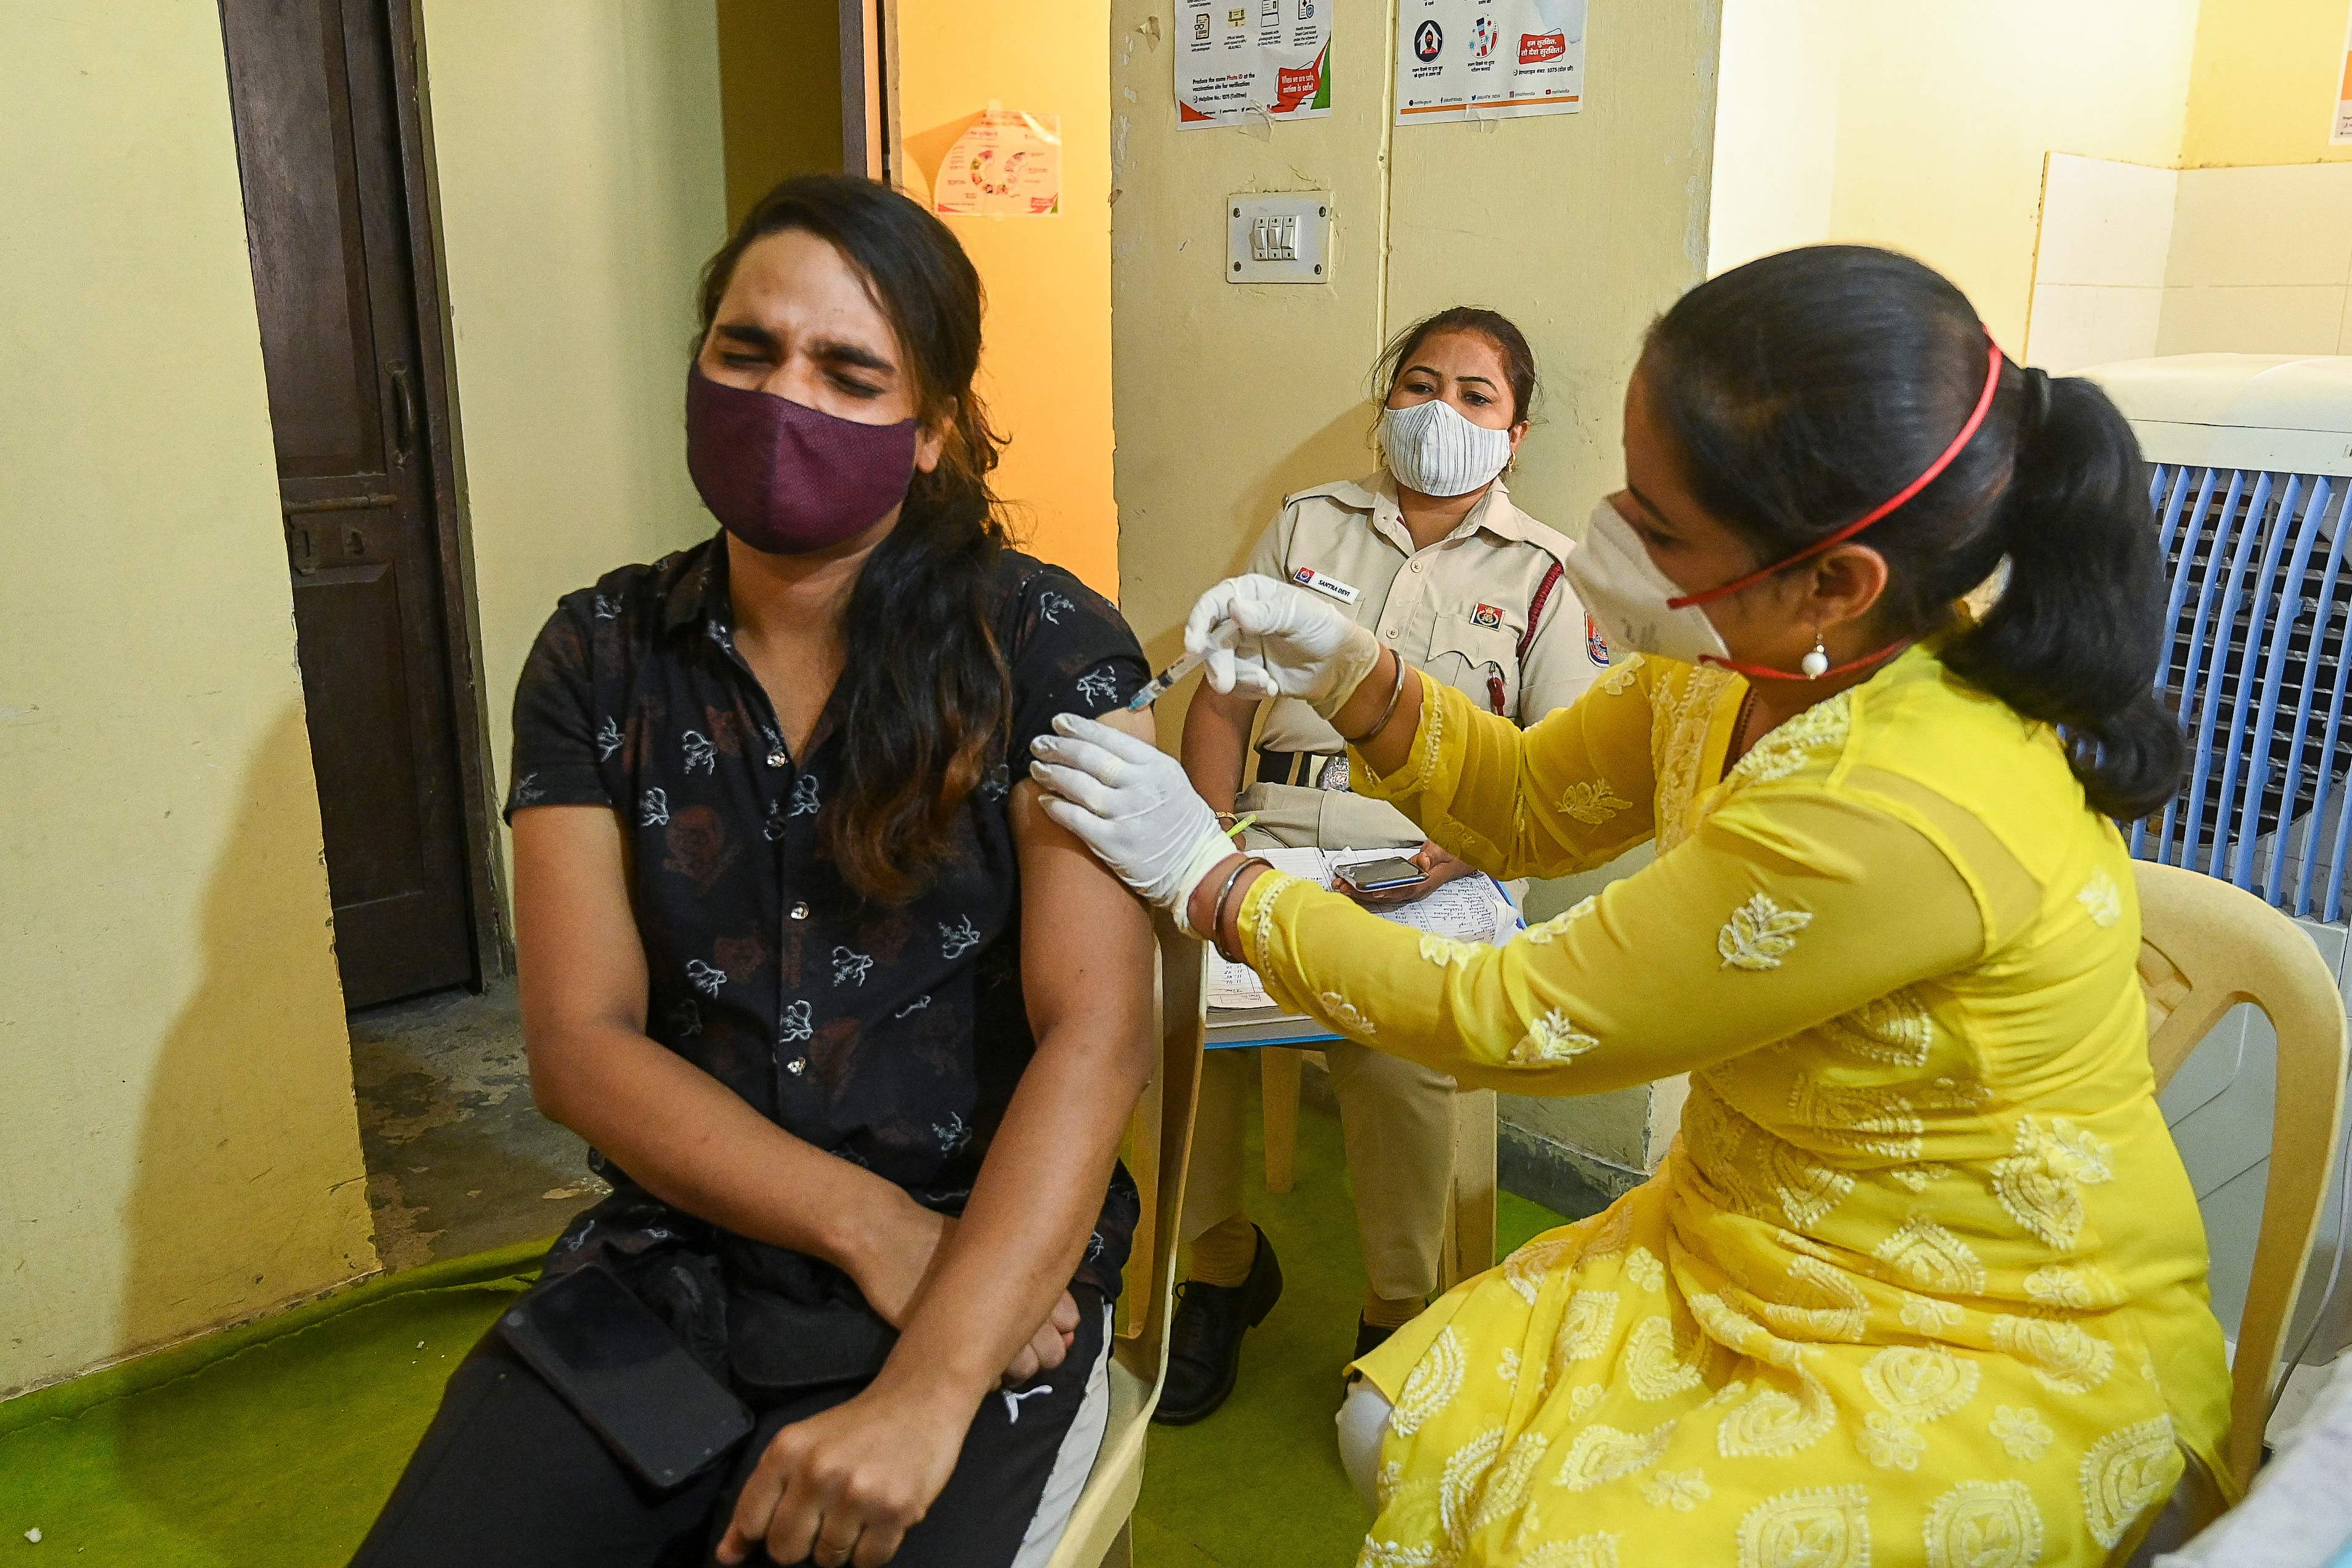 A health worker inoculates a transgender person with a dose of the Covishield vaccine against the Covid-19 coronavirus at a vaccination centre in New Delhi on 23 June, 2021